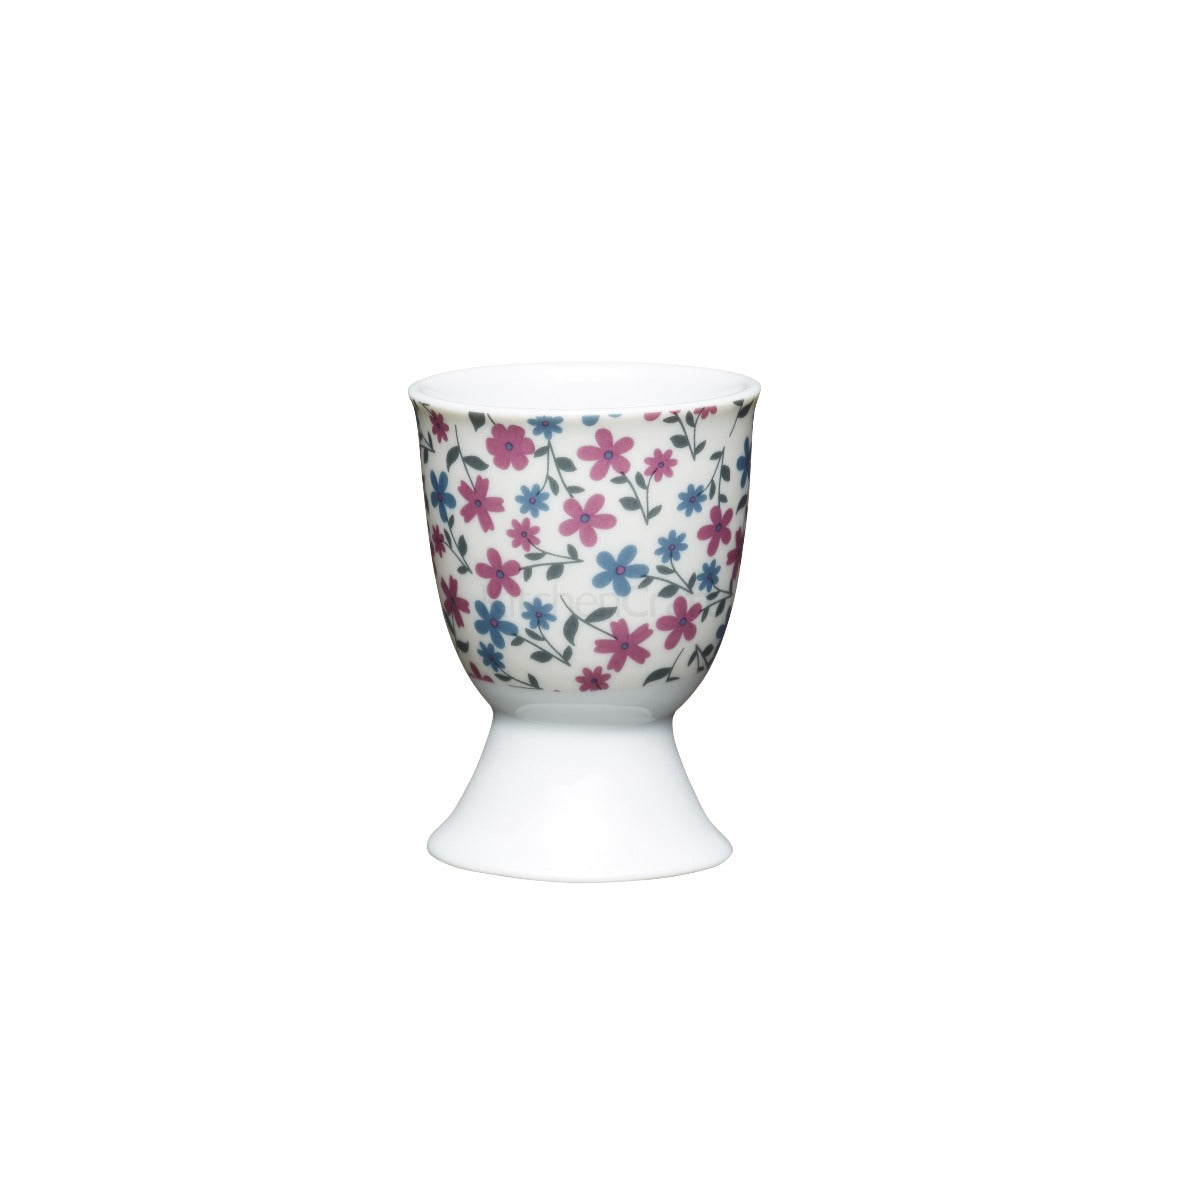 KitchenCraft Floral Daisy Porcelain Egg Cup